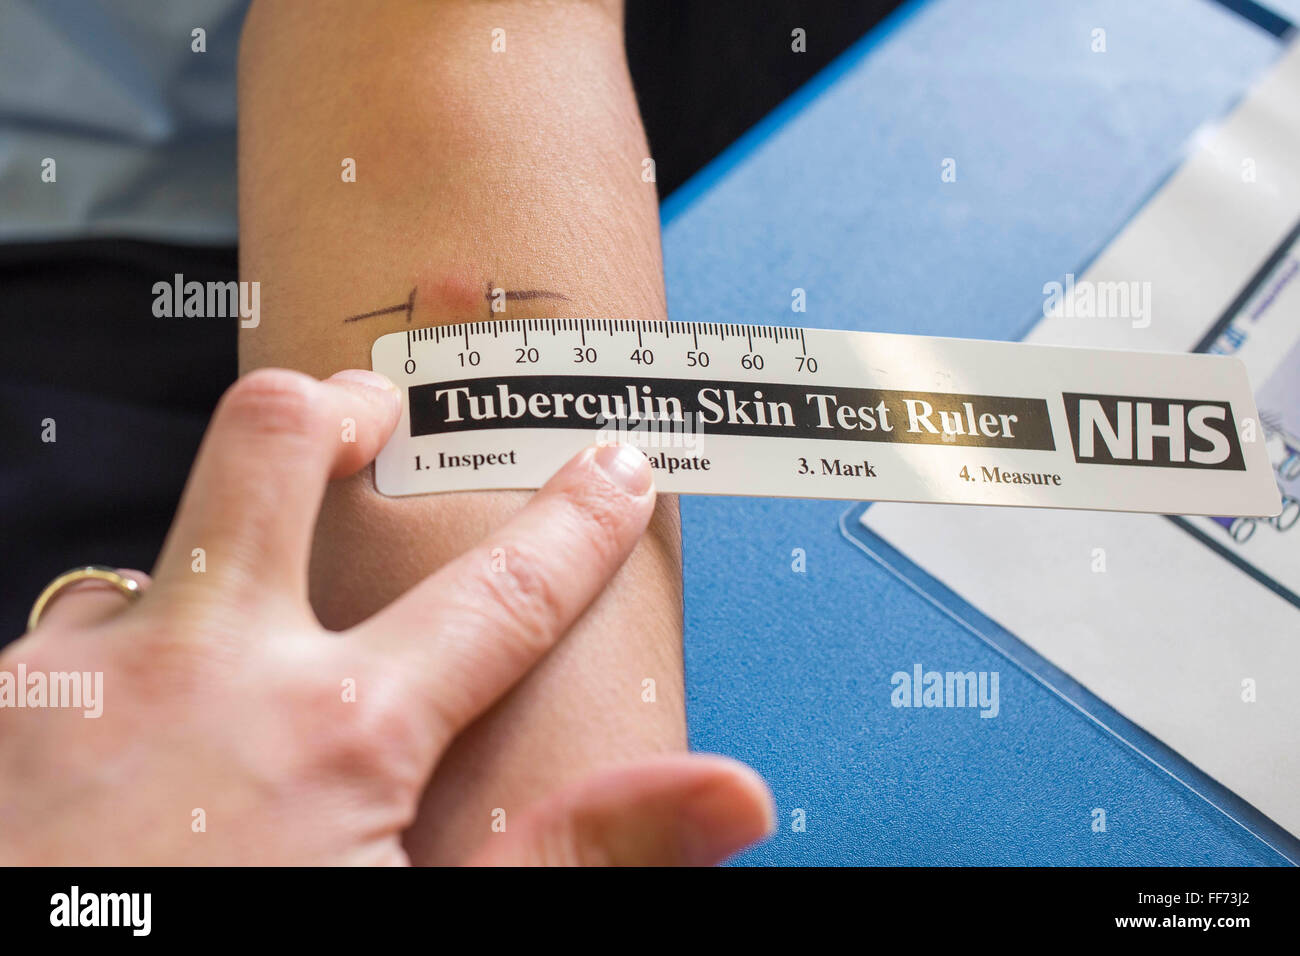 A reaction to the Mantoux PPD skin test is measured with a clinical ruler.  The test was administered as part of contact tracing to identify Latent TB Infection for someone who has been in close contact with a case of infectious tuberculosis. London, UK. Stock Photo